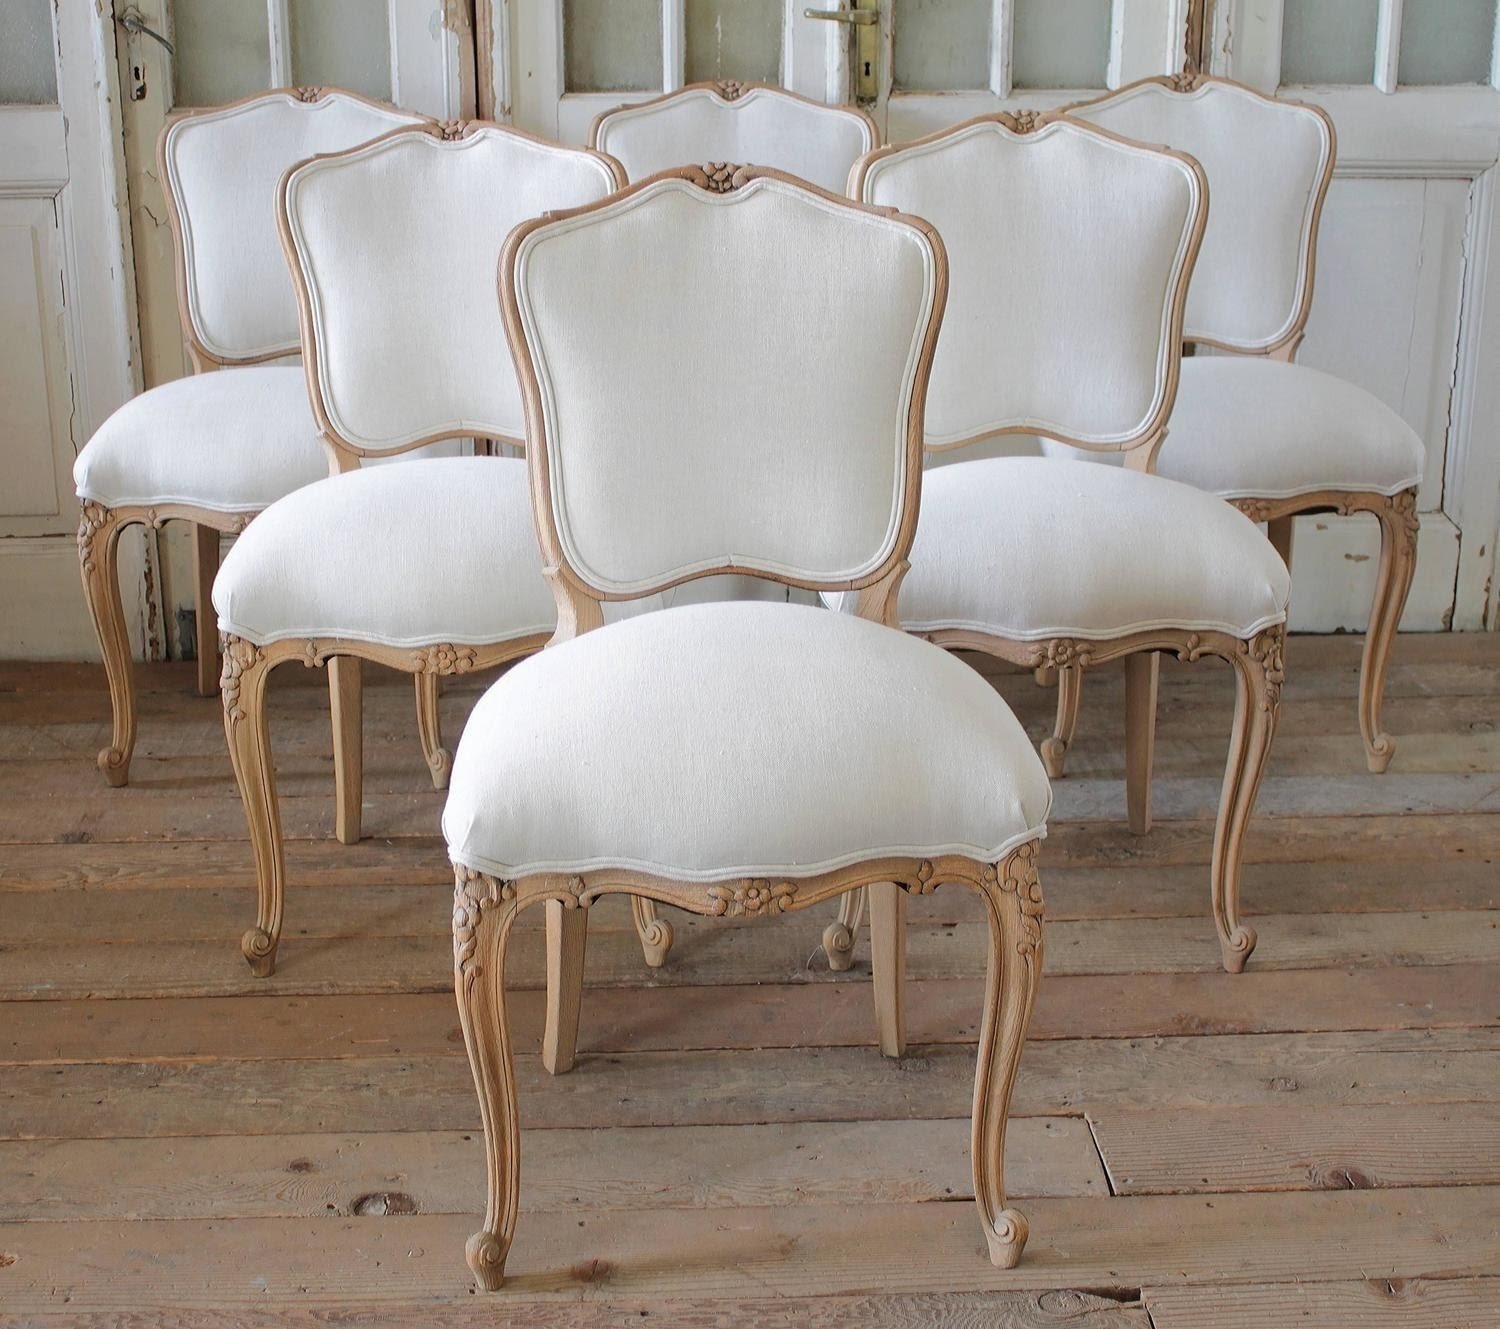 French Country Dining Room Chairs French Country Dining Chairs Birch Lane Our Lemans Dining